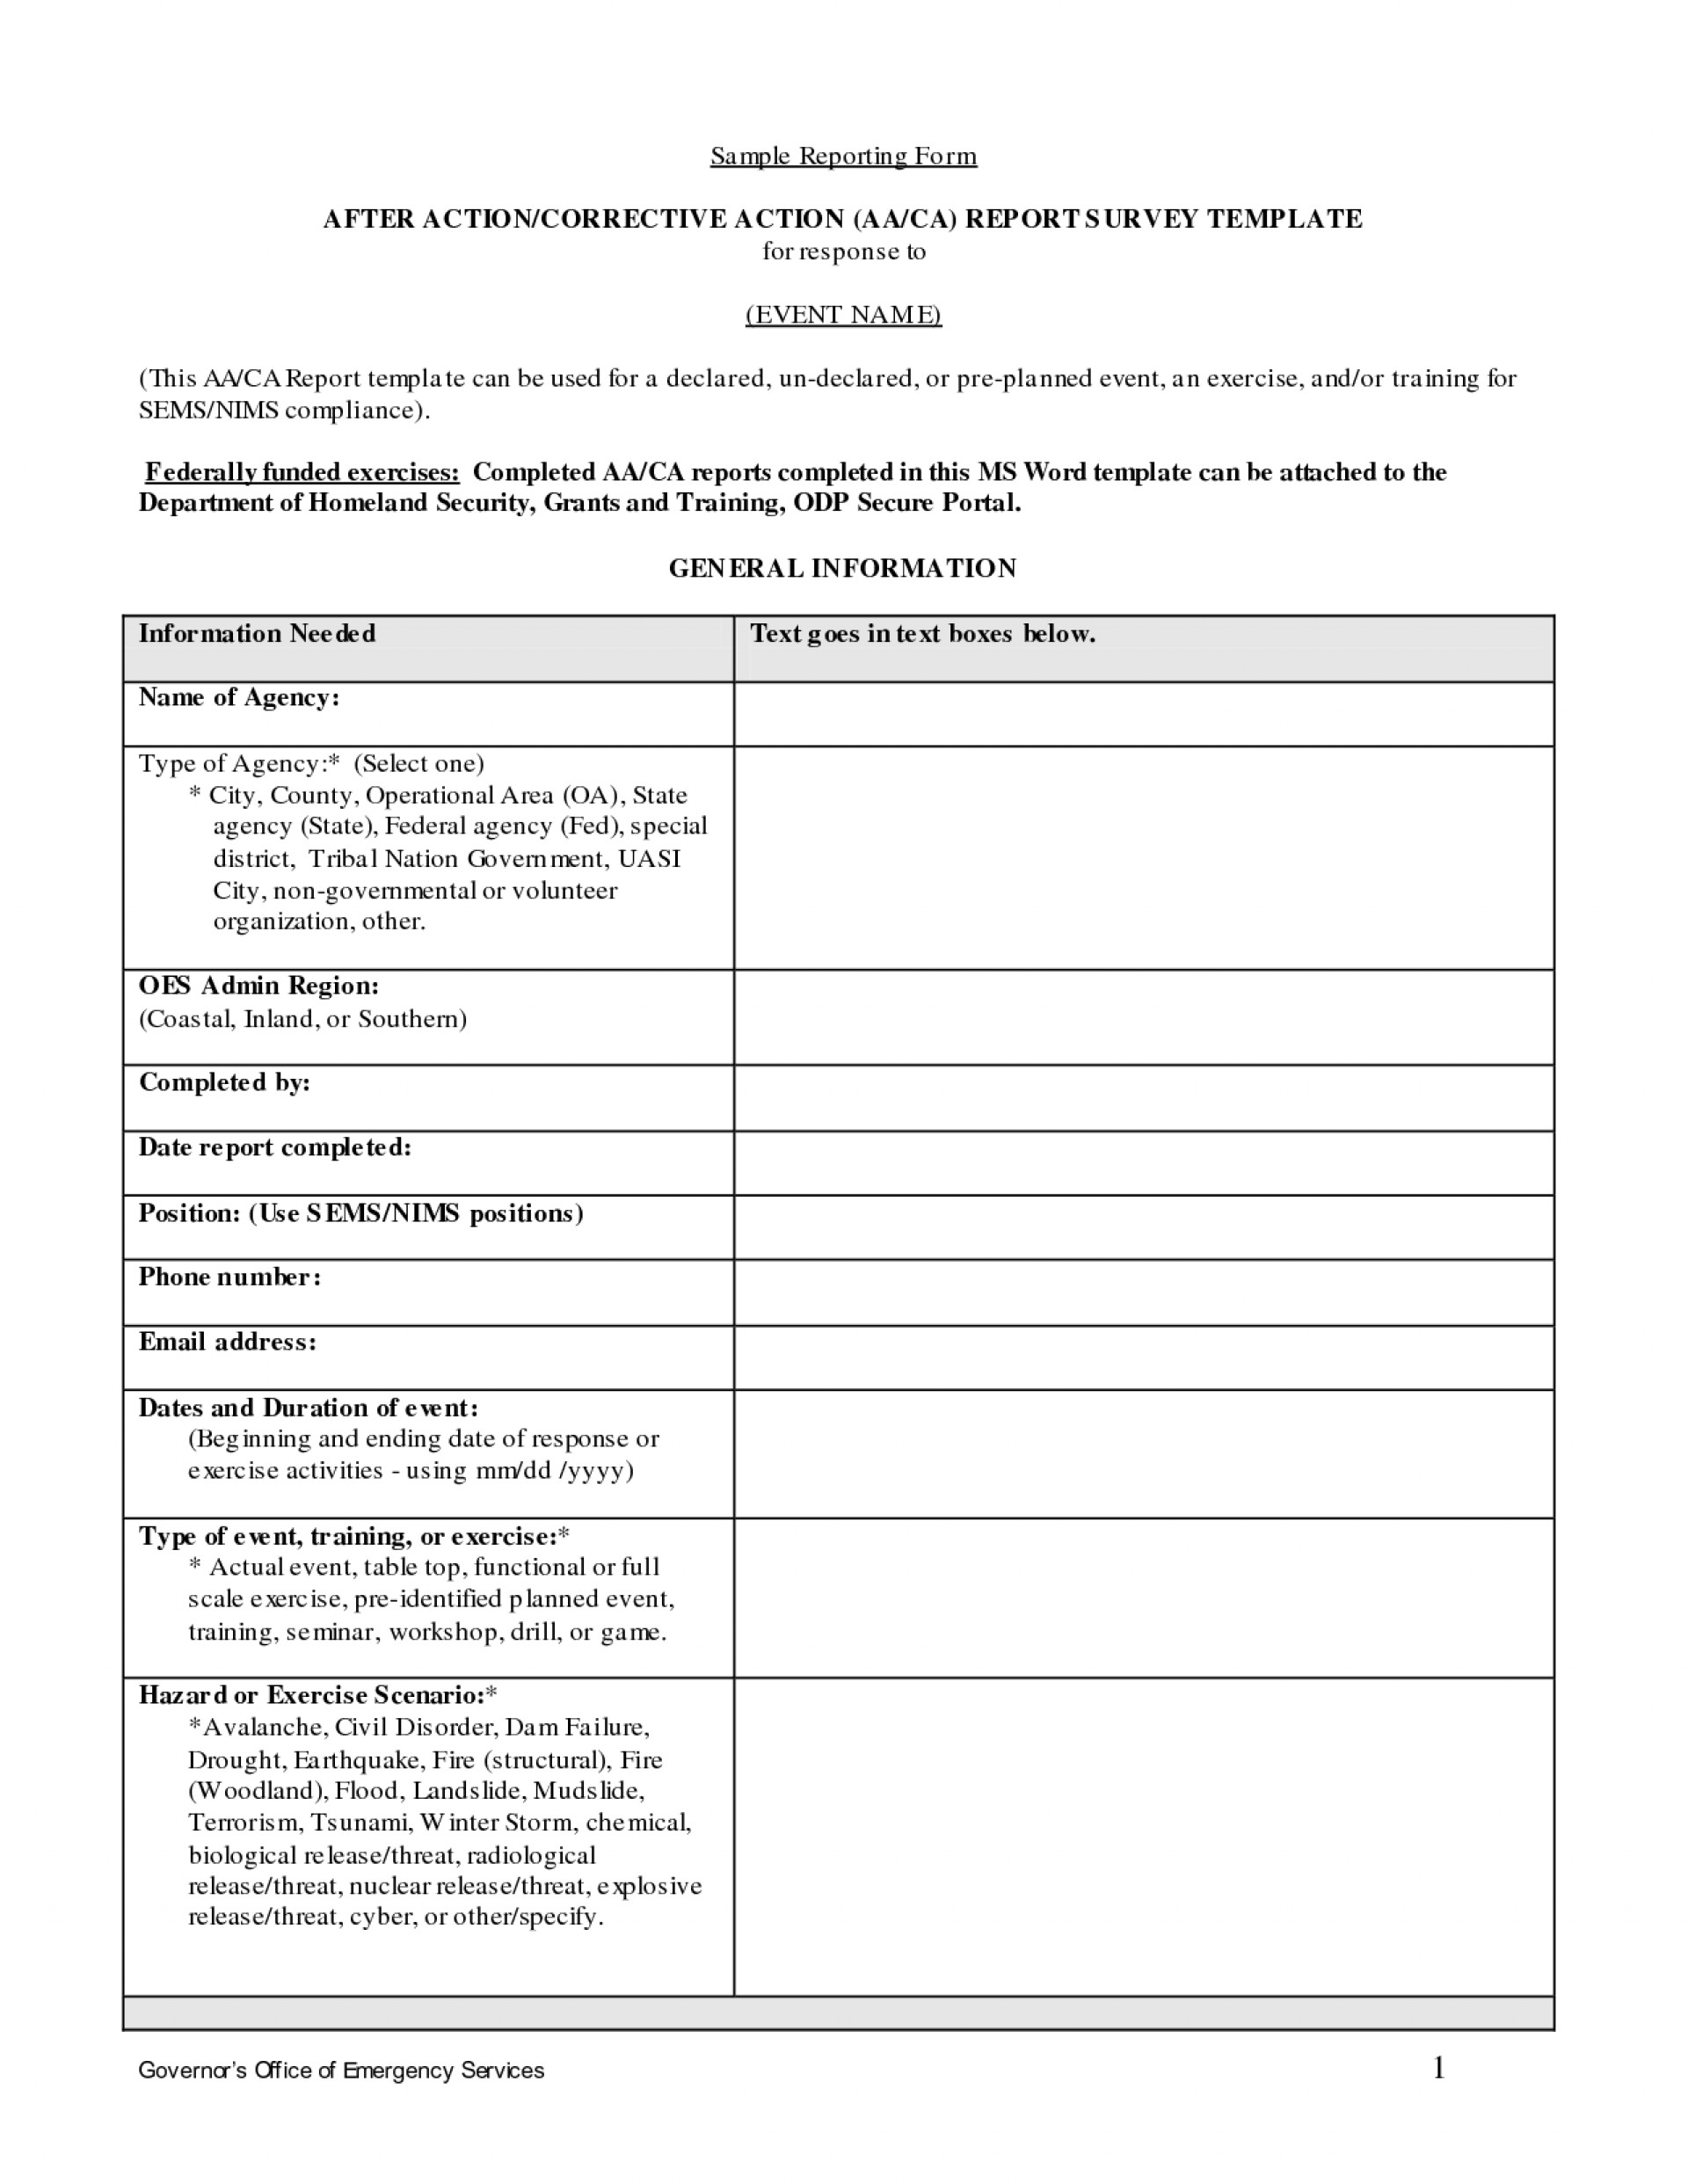 Template Ideas After Action Report Army  Unforgettable for After Training Report Template